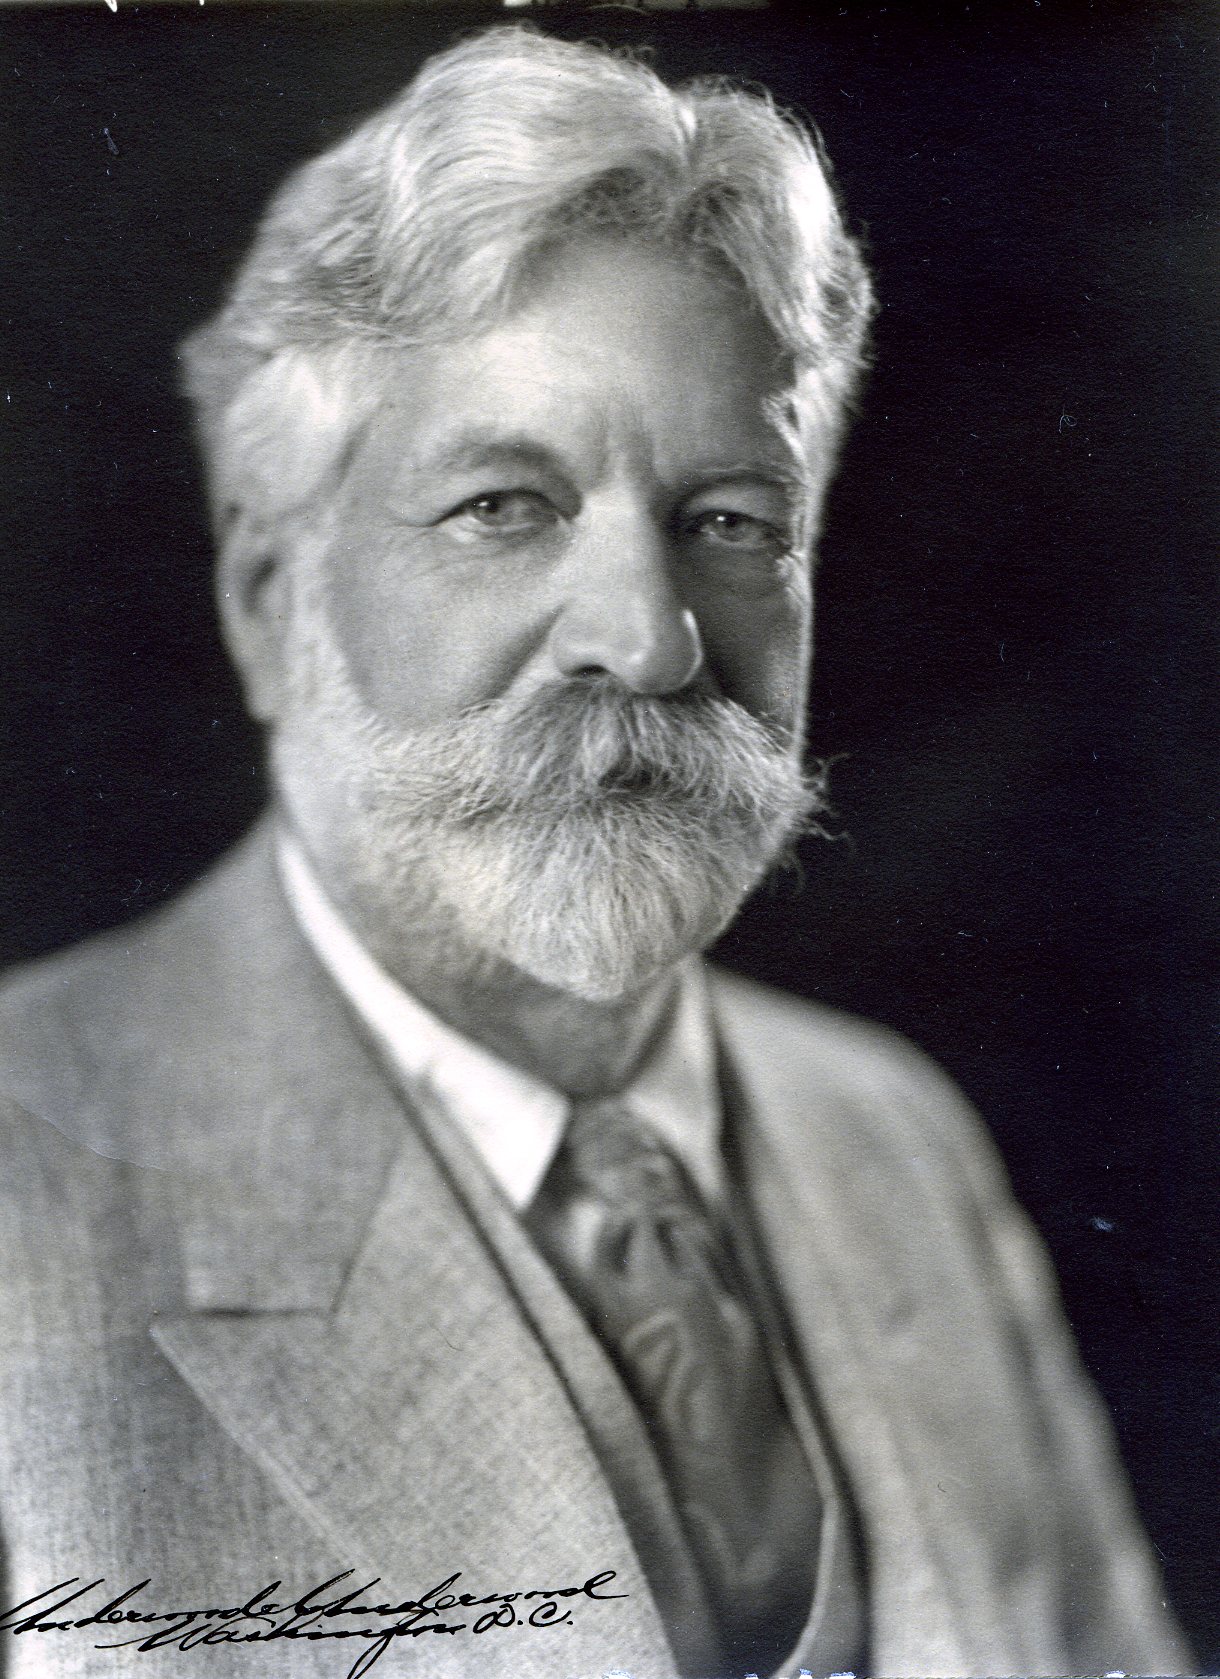 Member portrait of George Foster Peabody